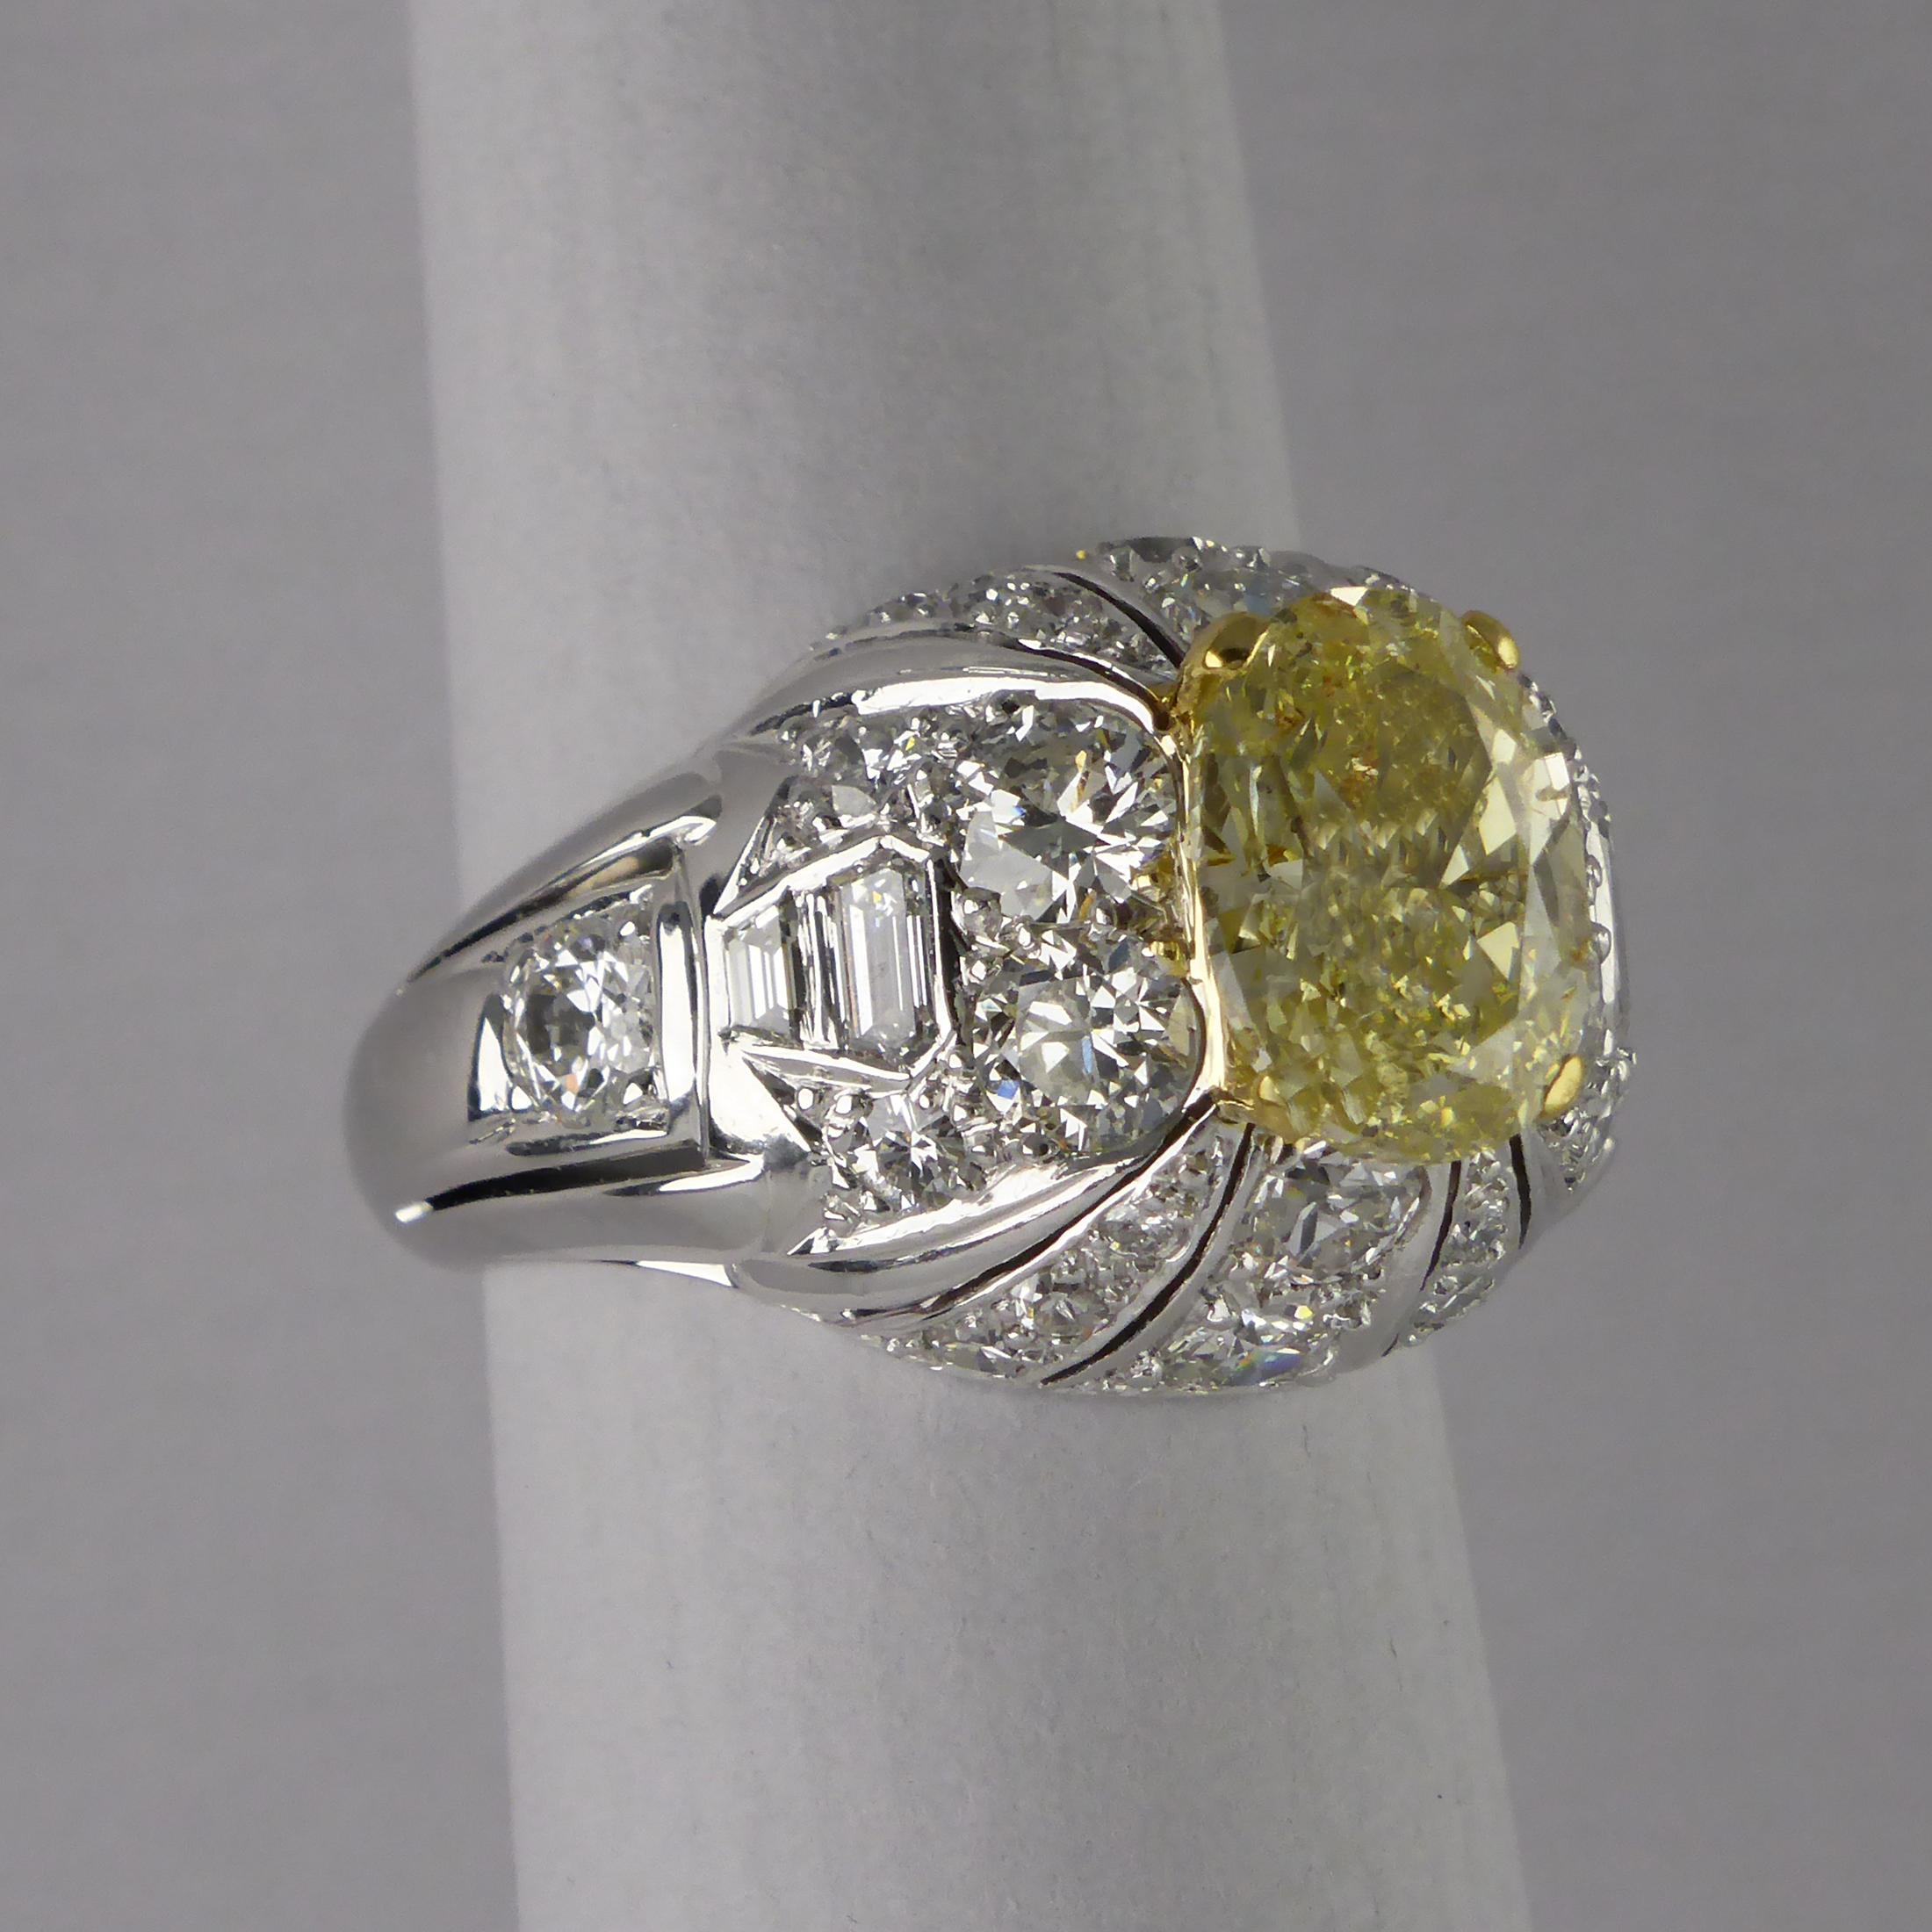 A period bombe ring with a fancy deep canary yellow colour, natural, untreated, diamond surrounded by white diamonds made in circa 1960. 

The diamonds are set in 18ct white gold.

Fancy Yellow Diamond certified weghing 2.11ct and SI2 clarity. Oval